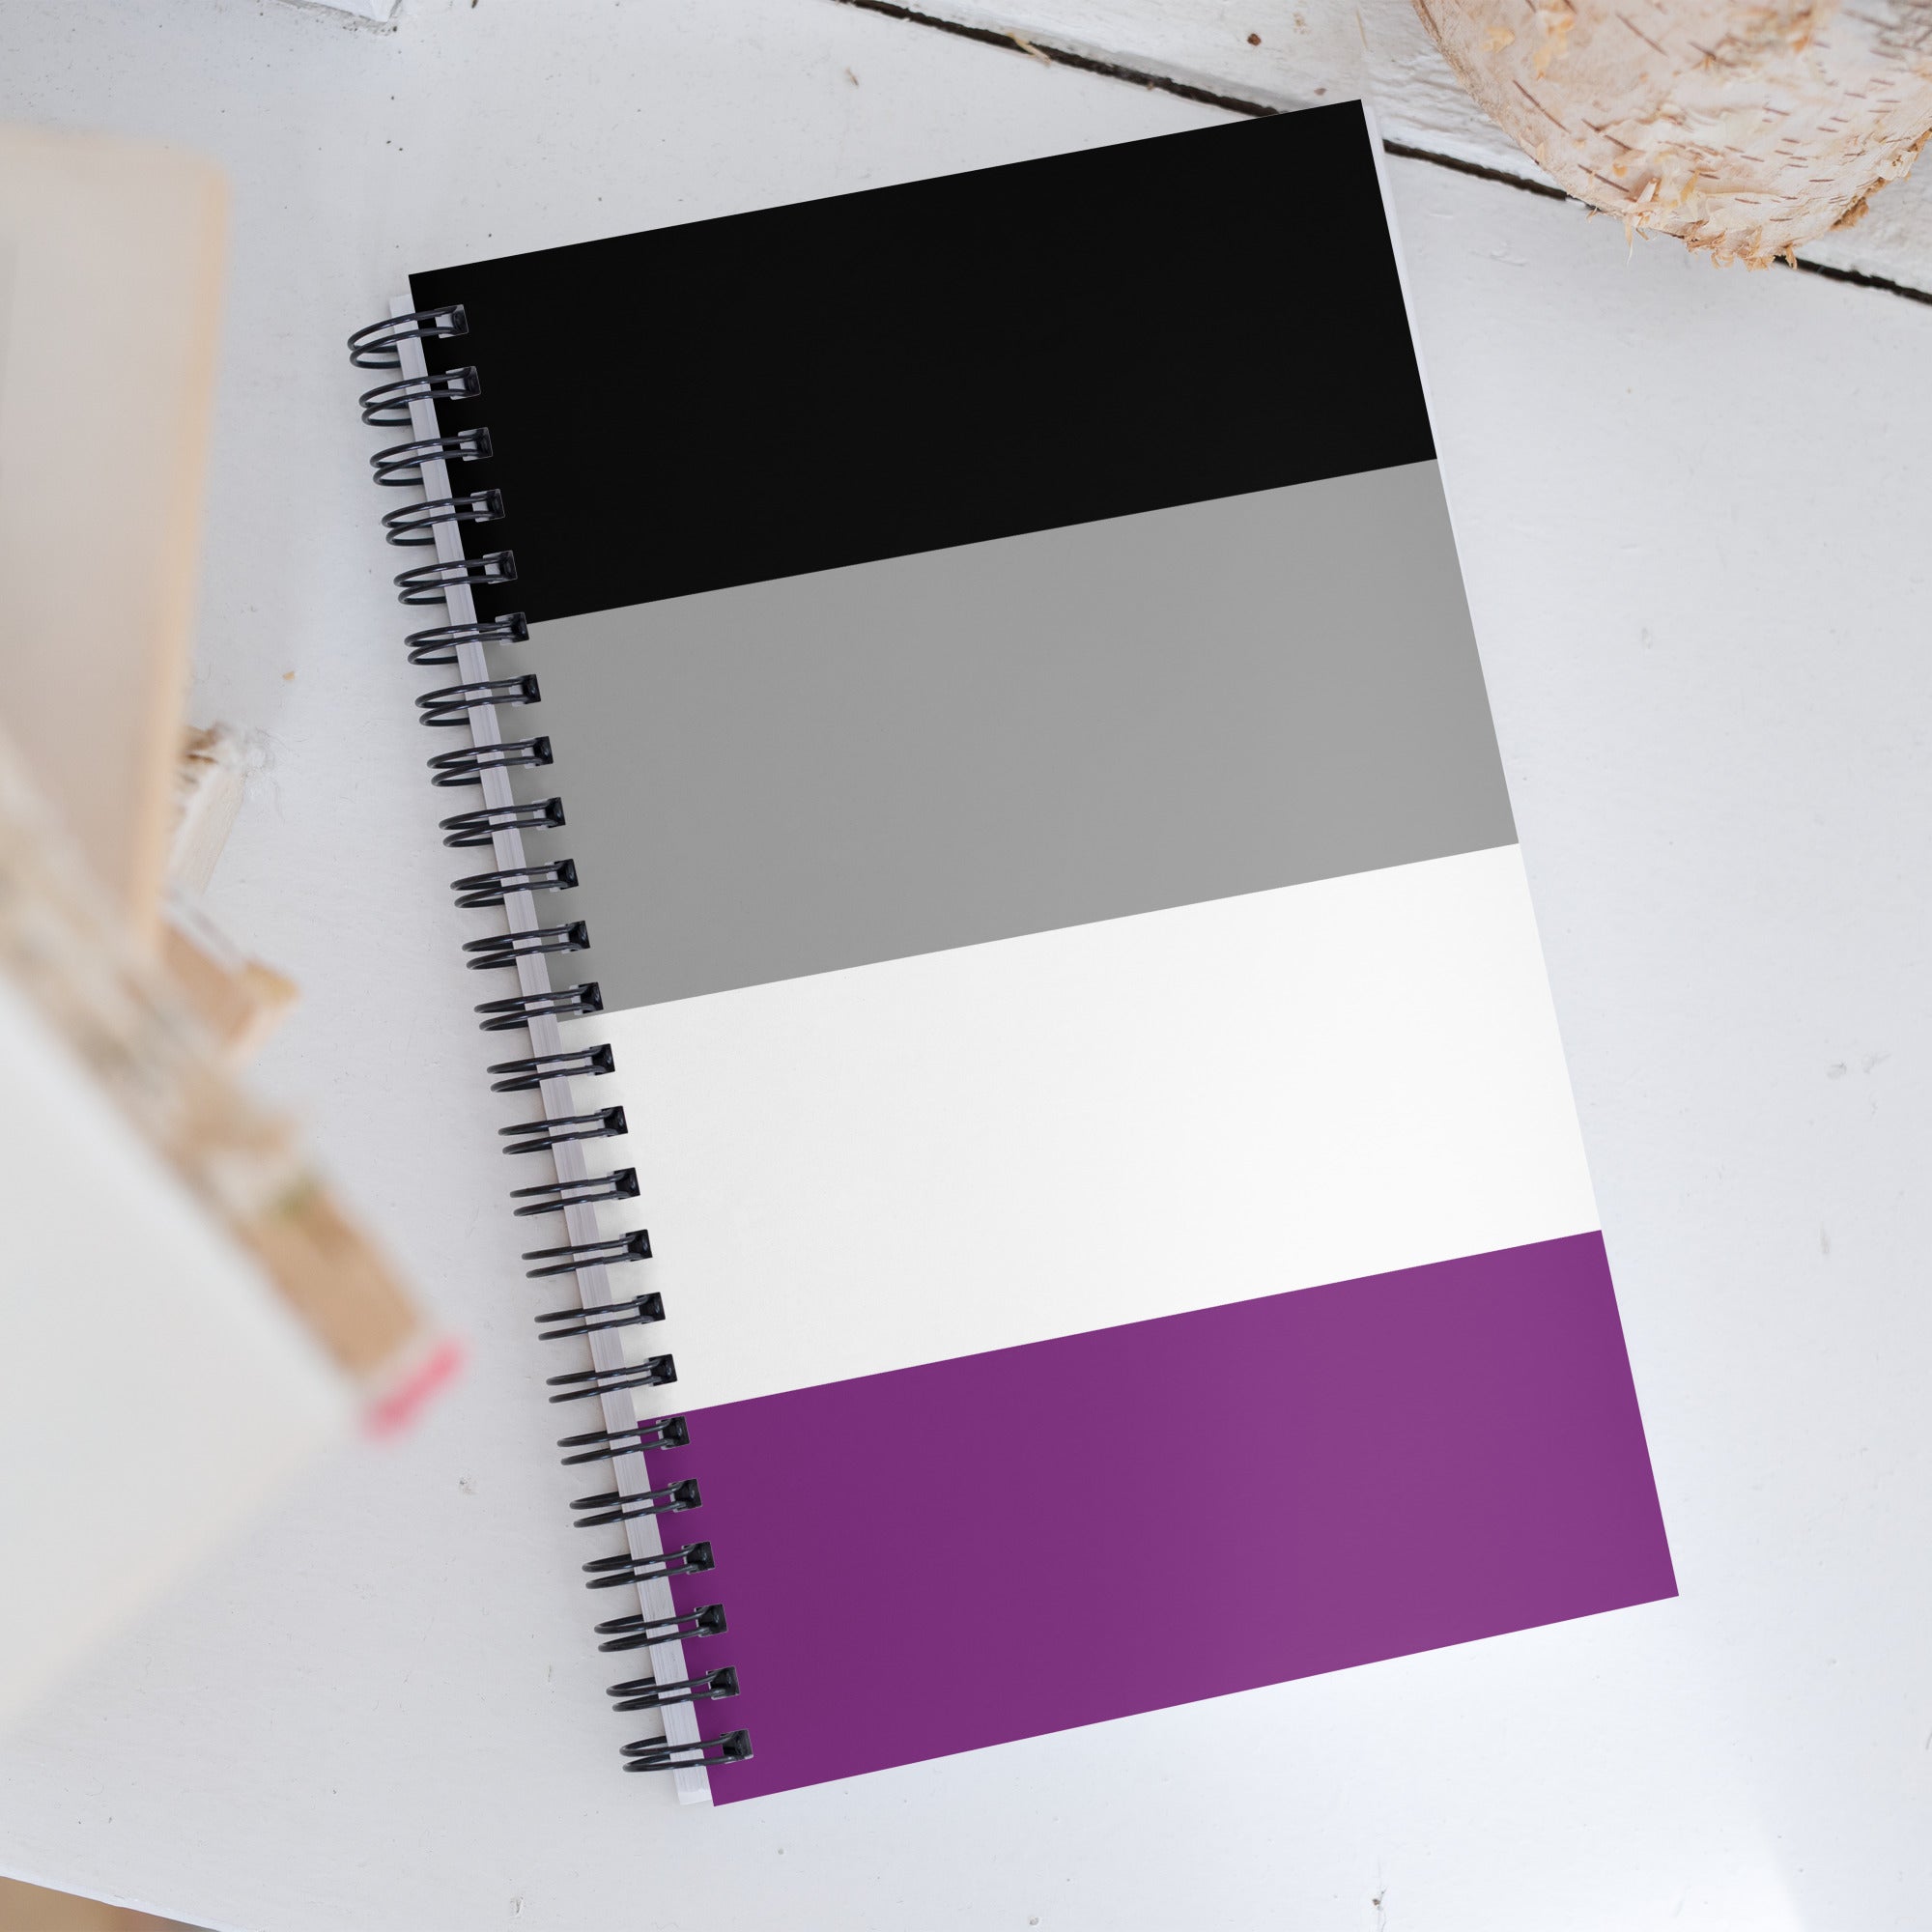 Spiral notebook- Asexual